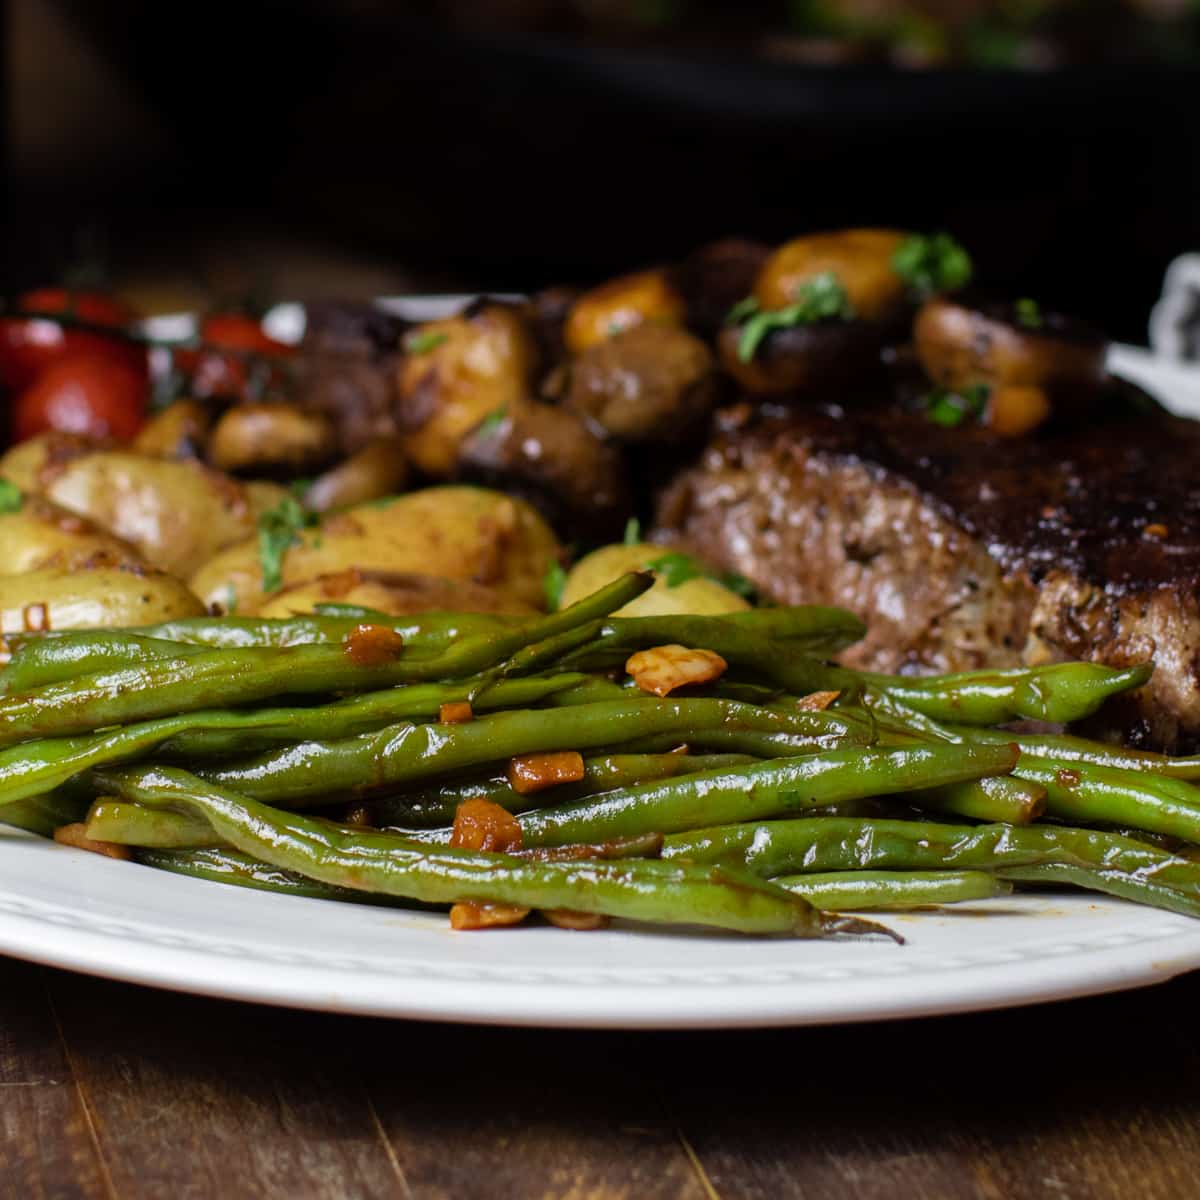 Green beans on a plate with steak and potatoes.